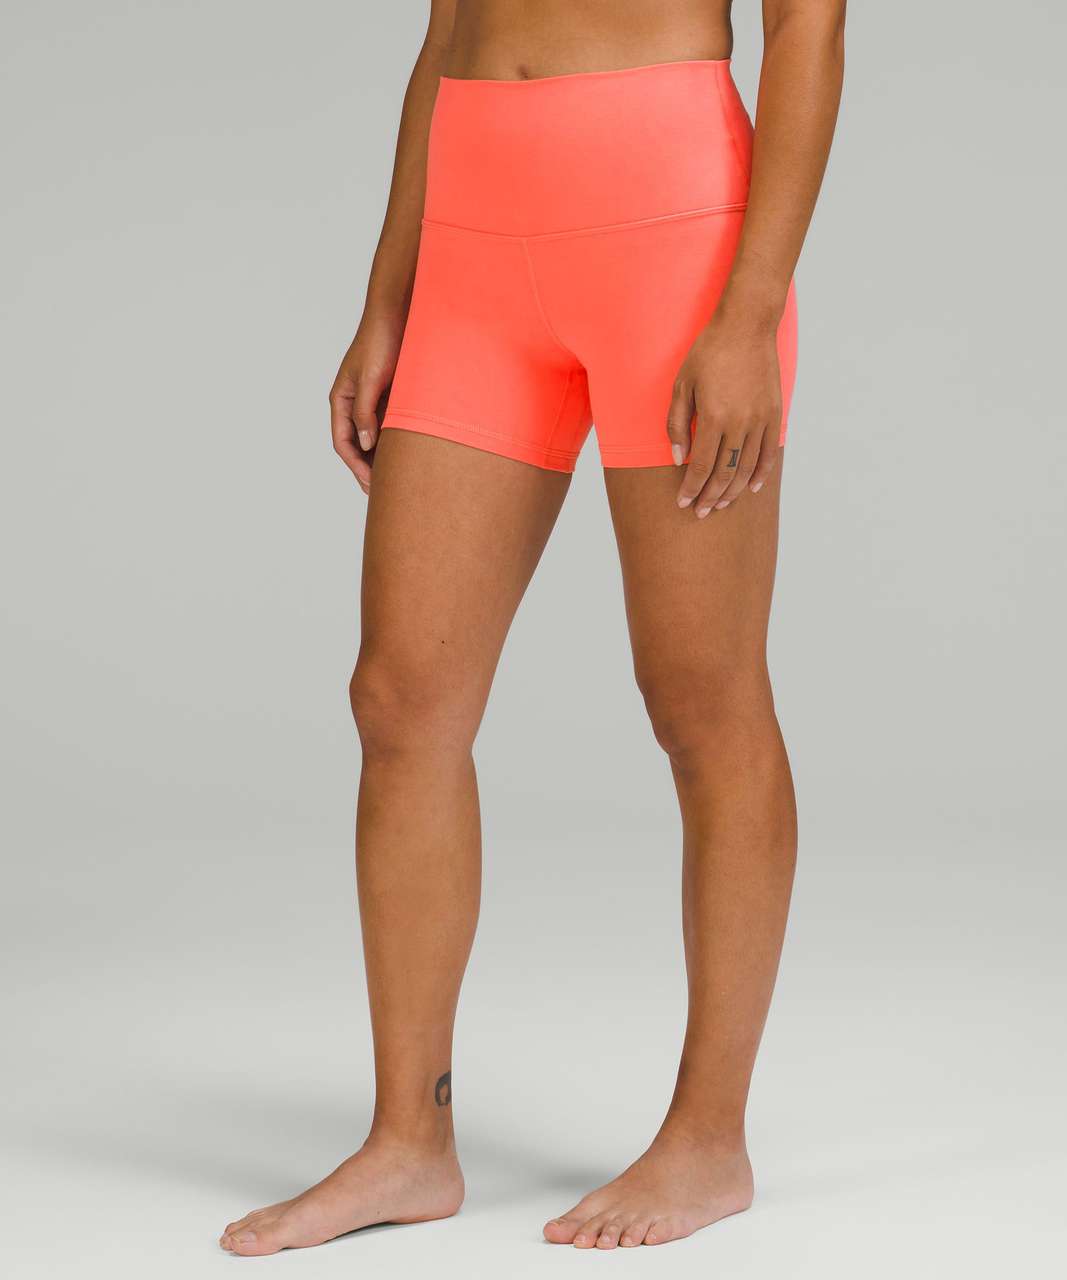 Align short 4' in Raspberry Cream paired with FTBW in Electric Lemon -  perfect for yoga 🧘 : r/lululemon